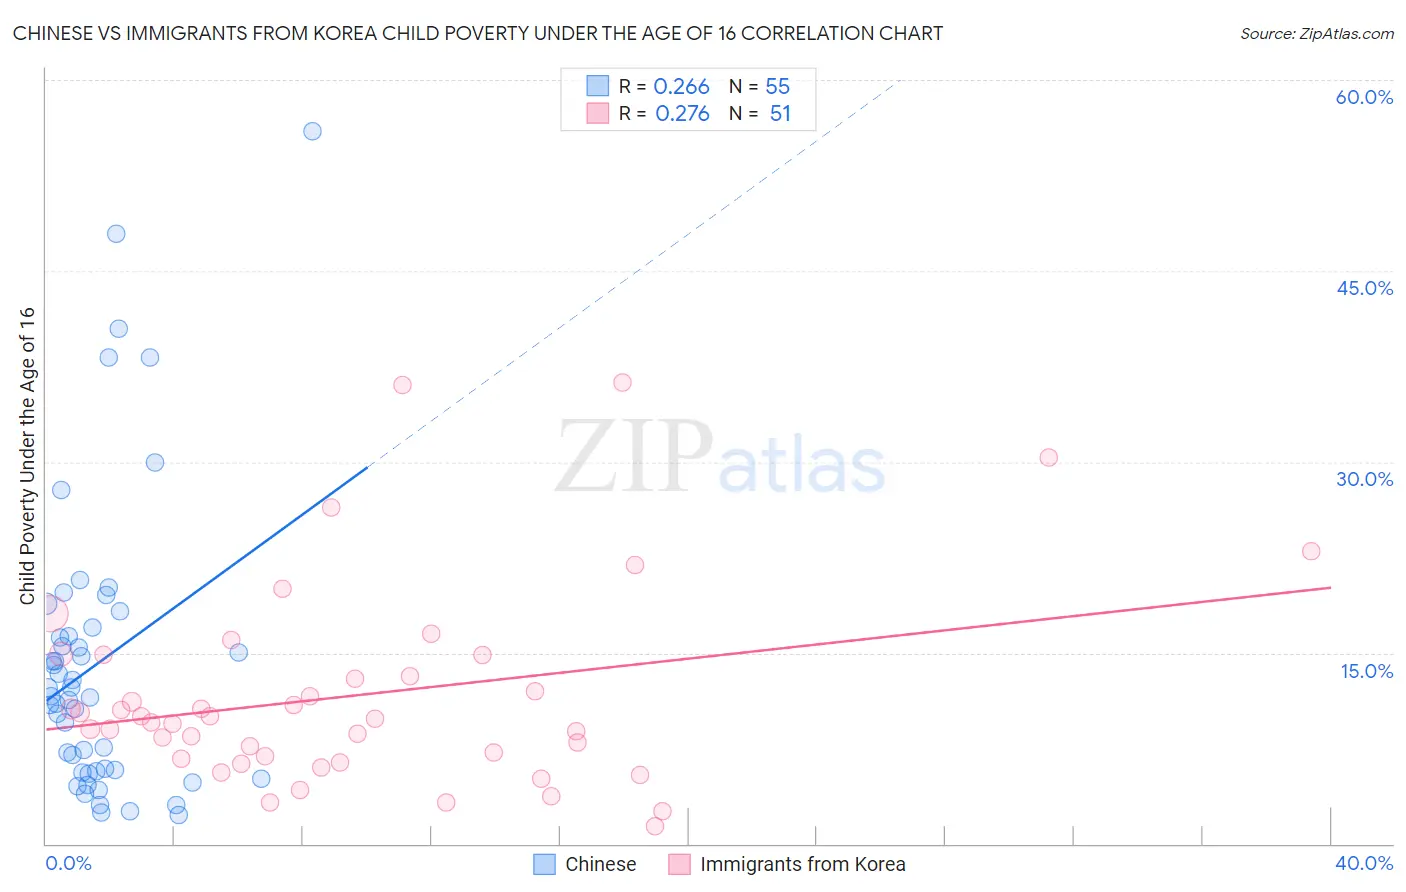 Chinese vs Immigrants from Korea Child Poverty Under the Age of 16